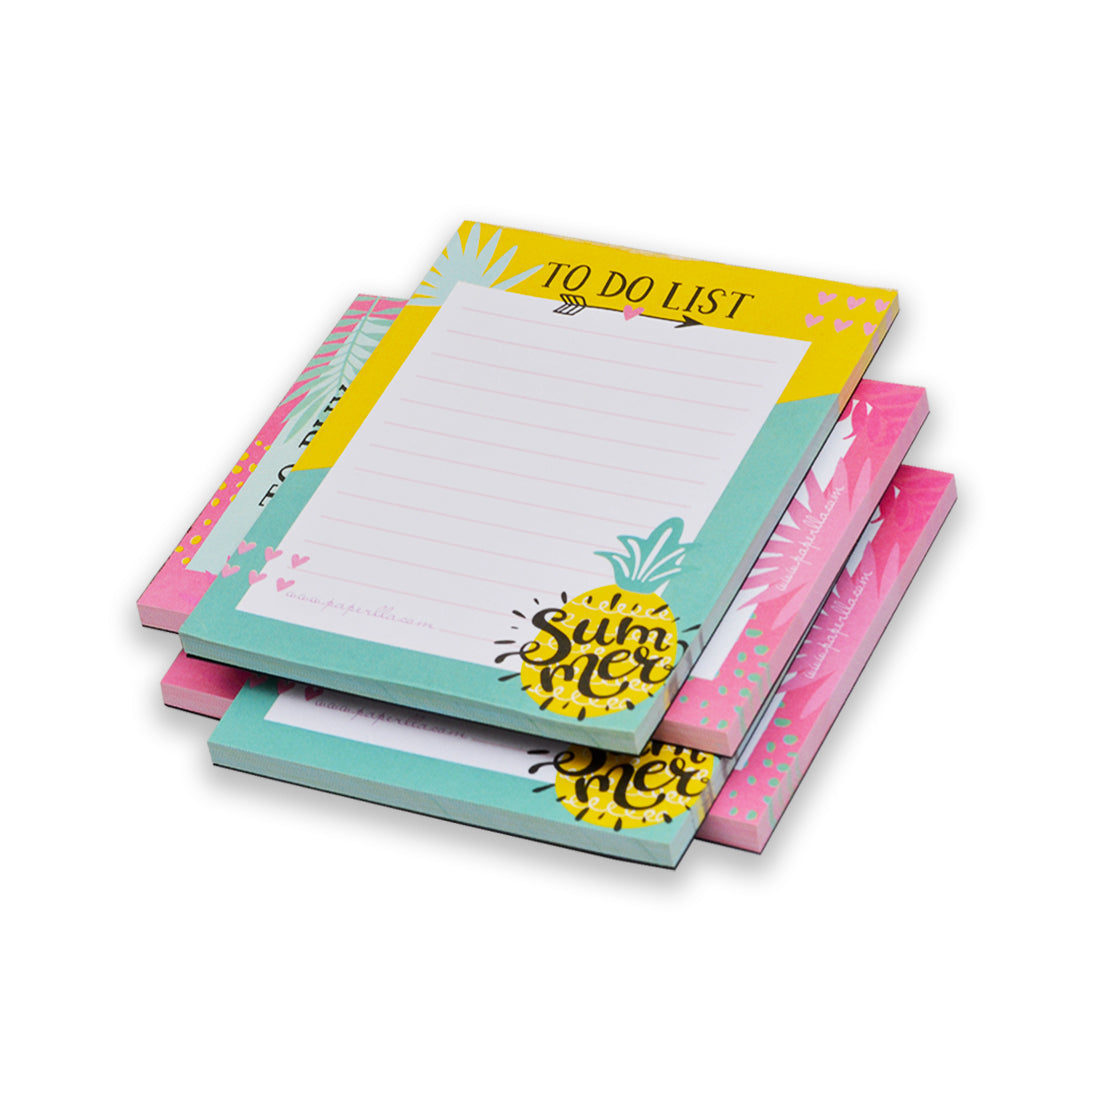 Always Have Hope - Magnetic Notepad - Gift | DaySpring